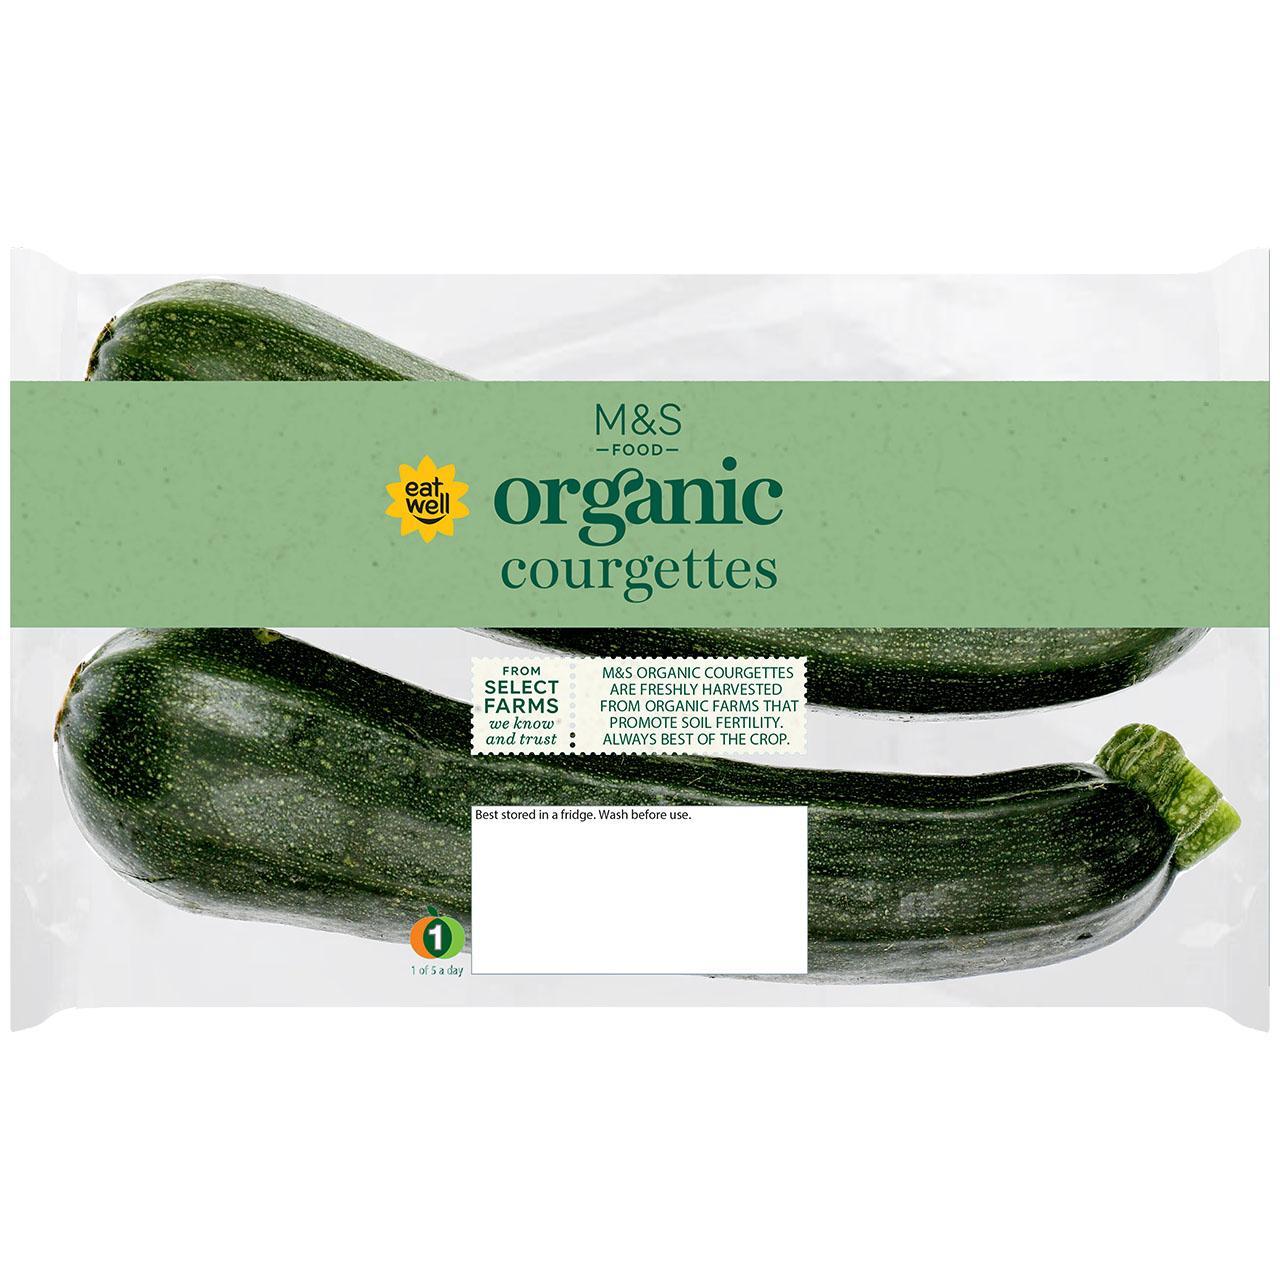 M&S Organic Courgettes